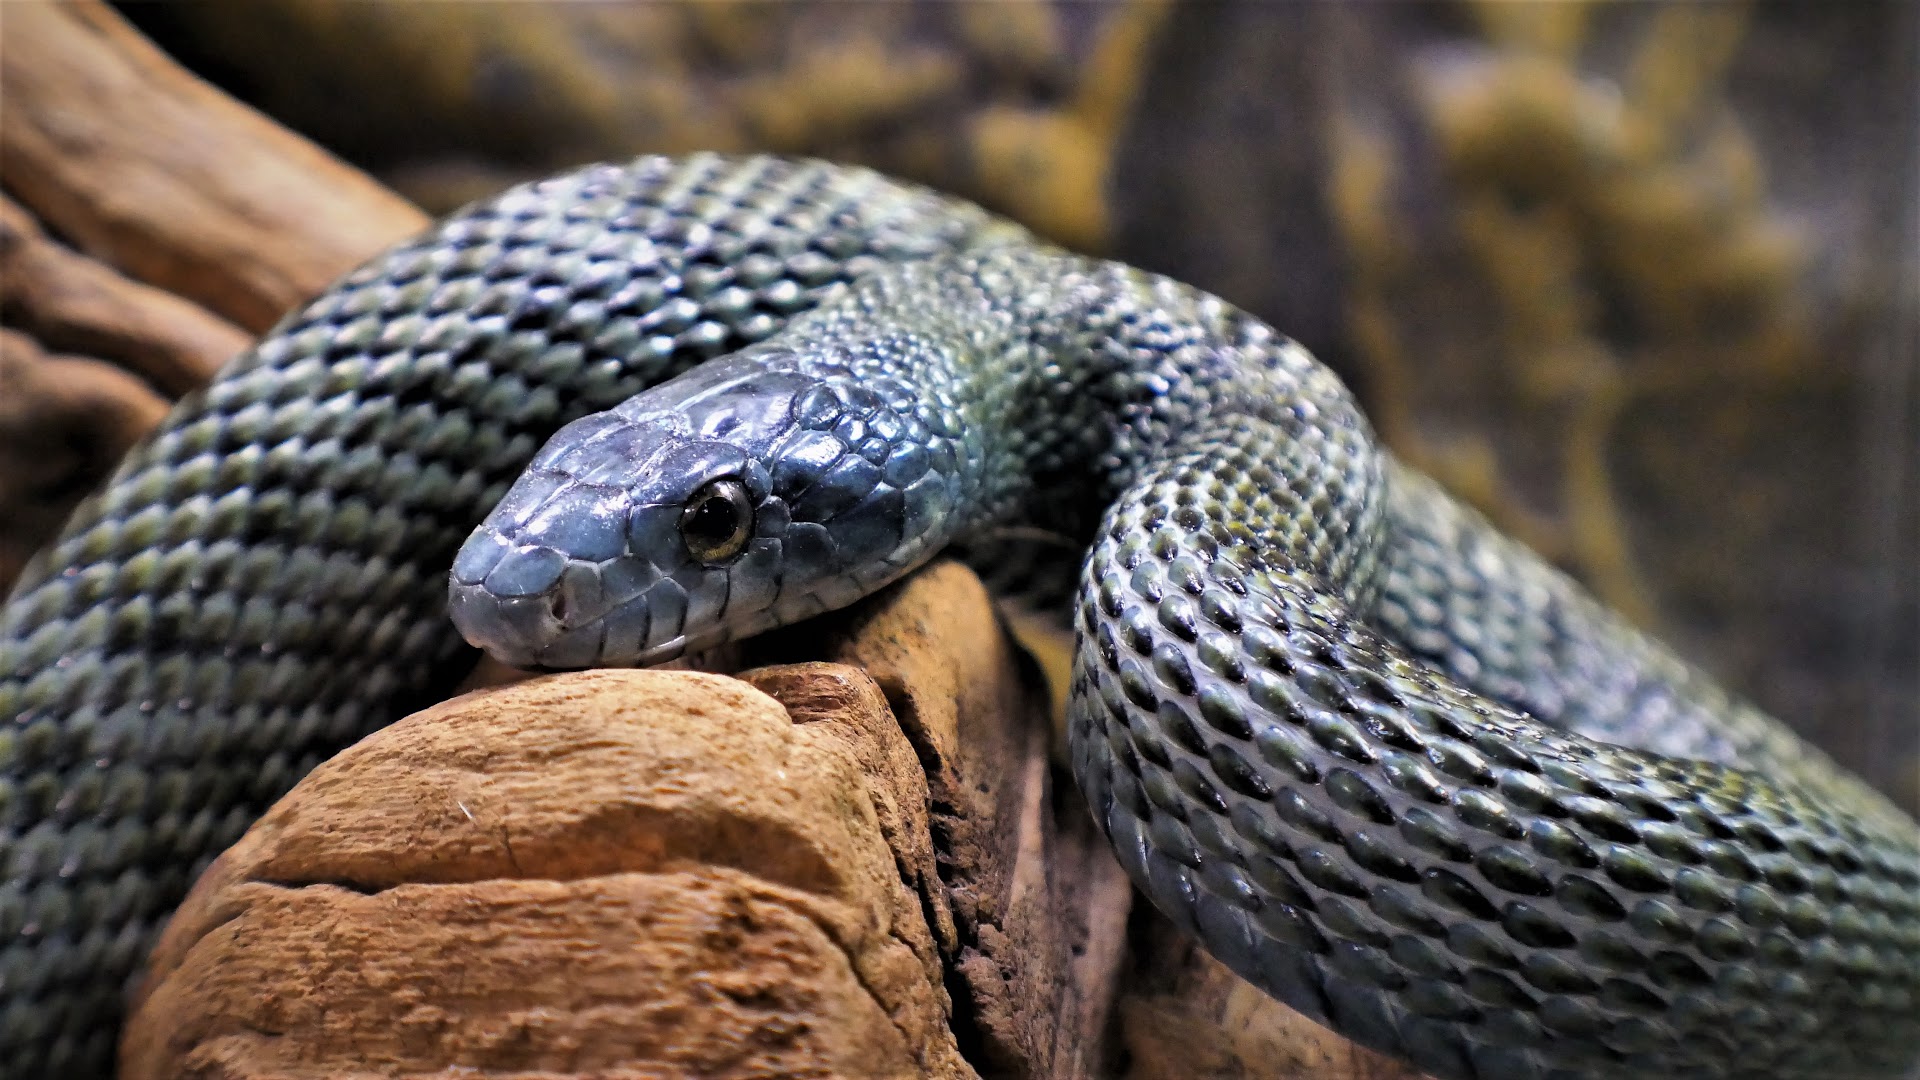 Hudson Valley Reptile and Rescue